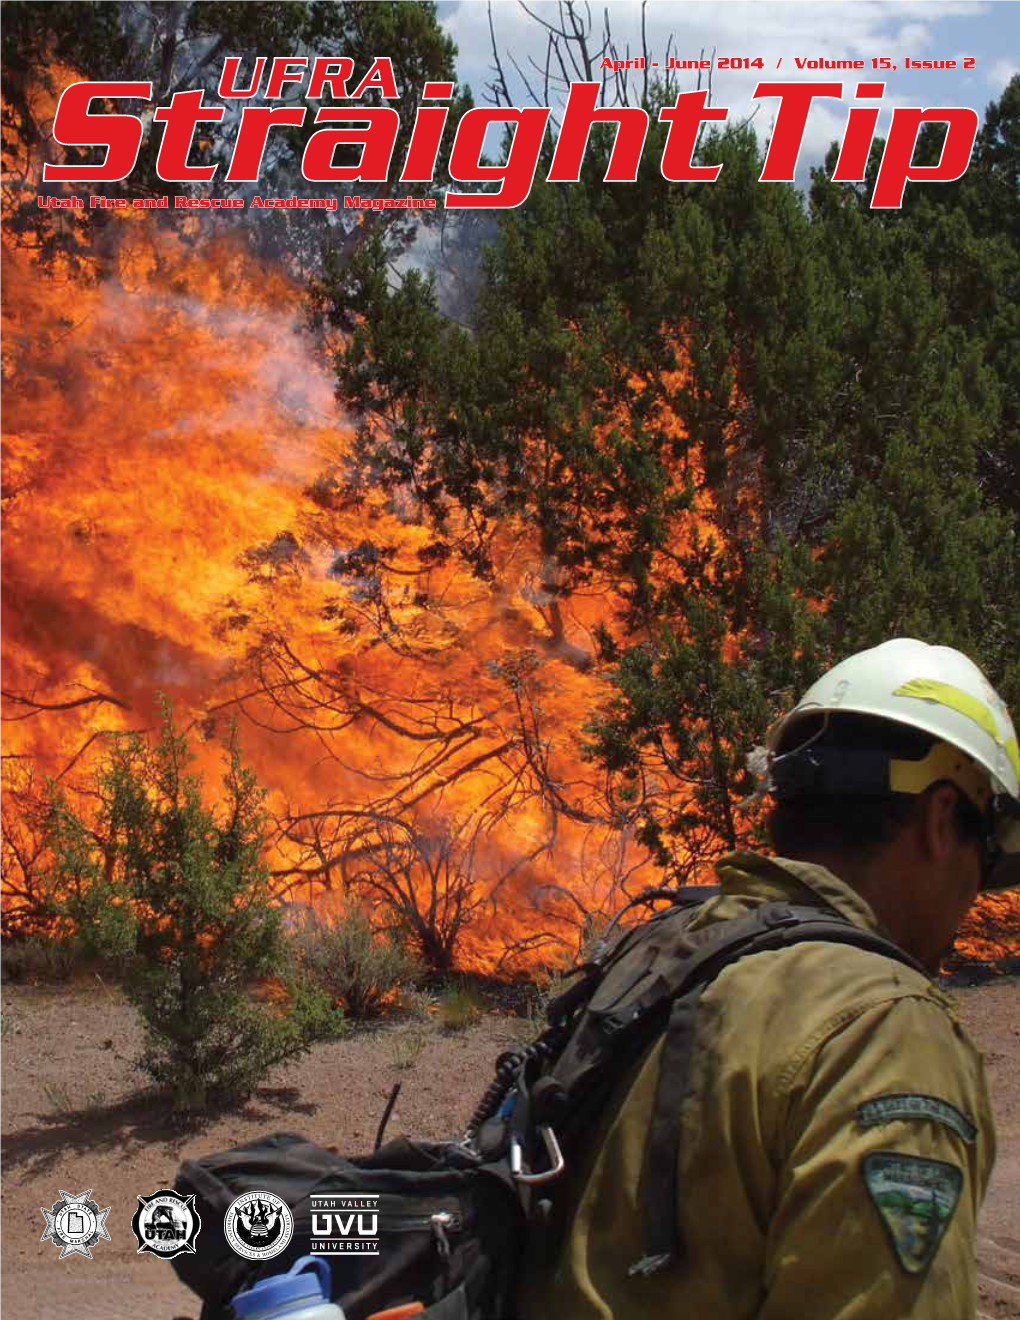 Utah Fire and Rescue Academy Magazine April